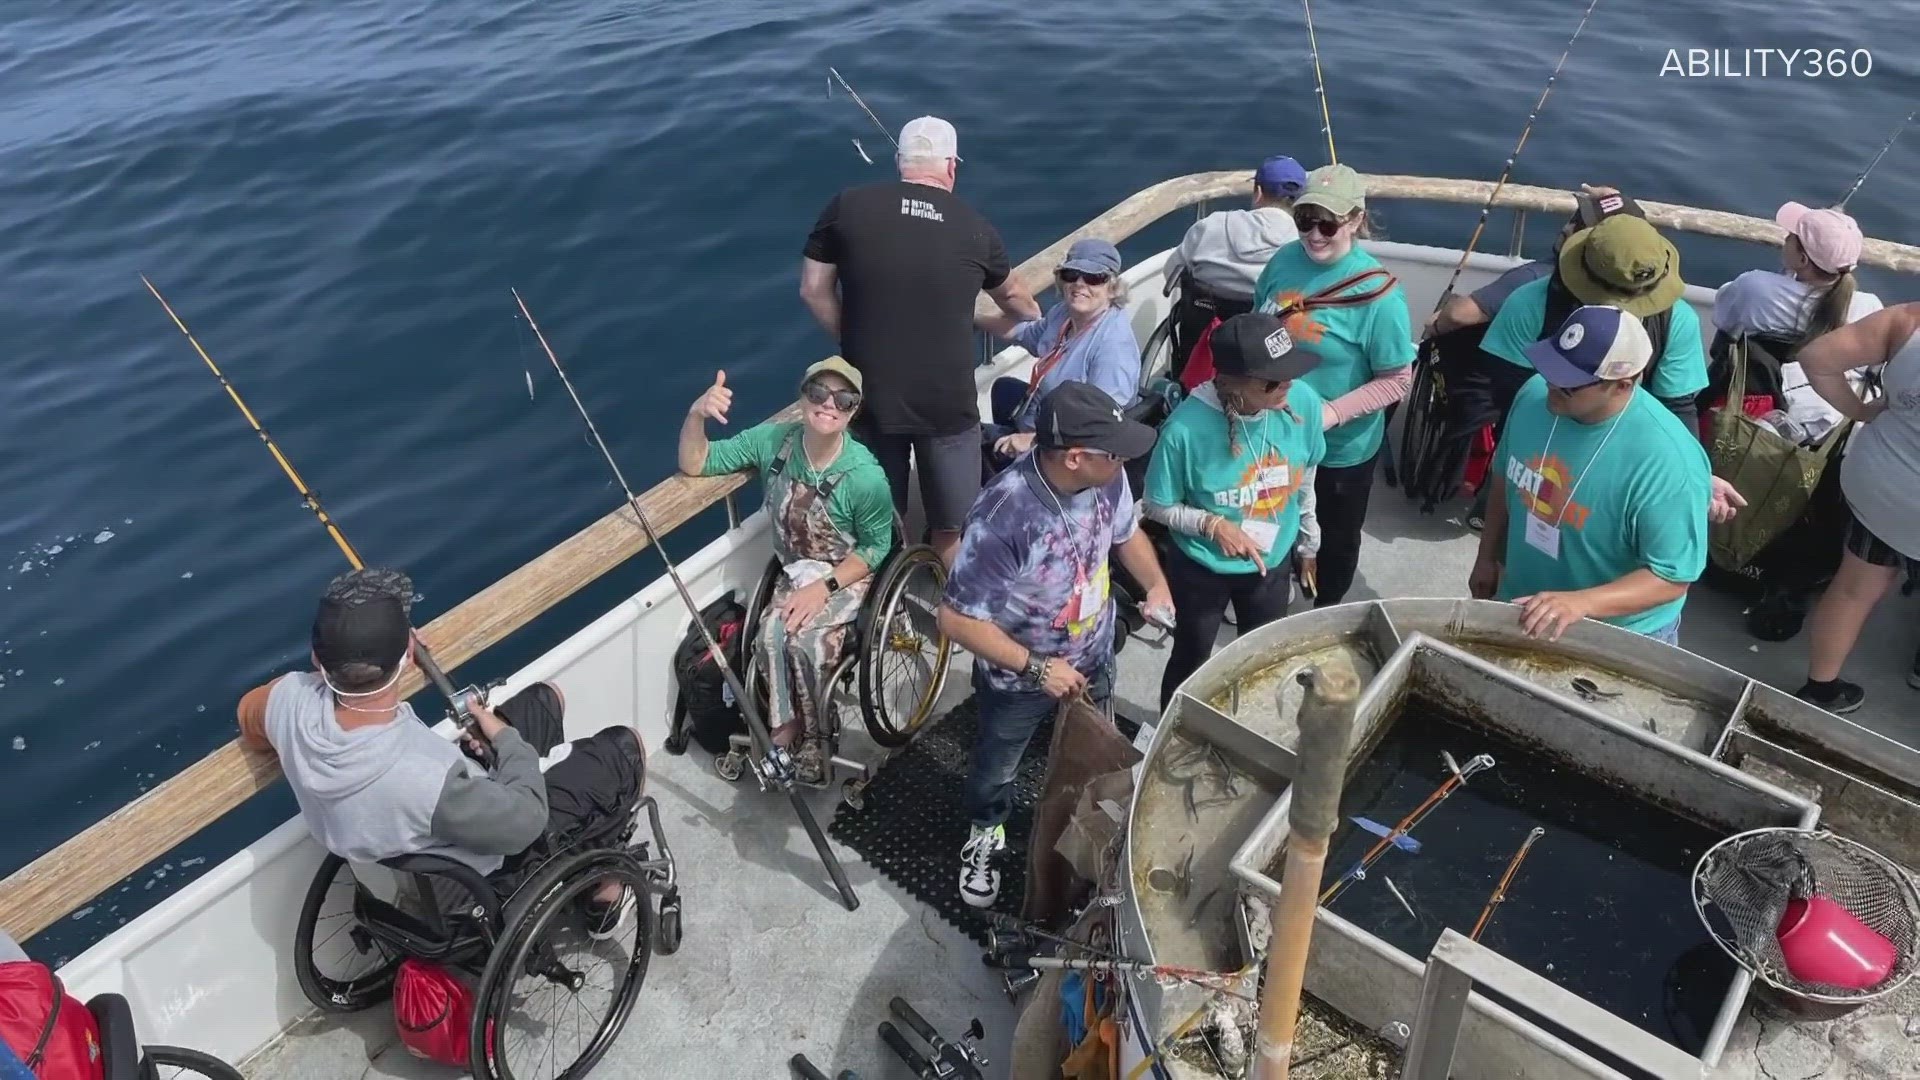 A group of people with disabilities recently had the opportunity to go on an inclusive adventure to Catalina Island thanks to Ability360.